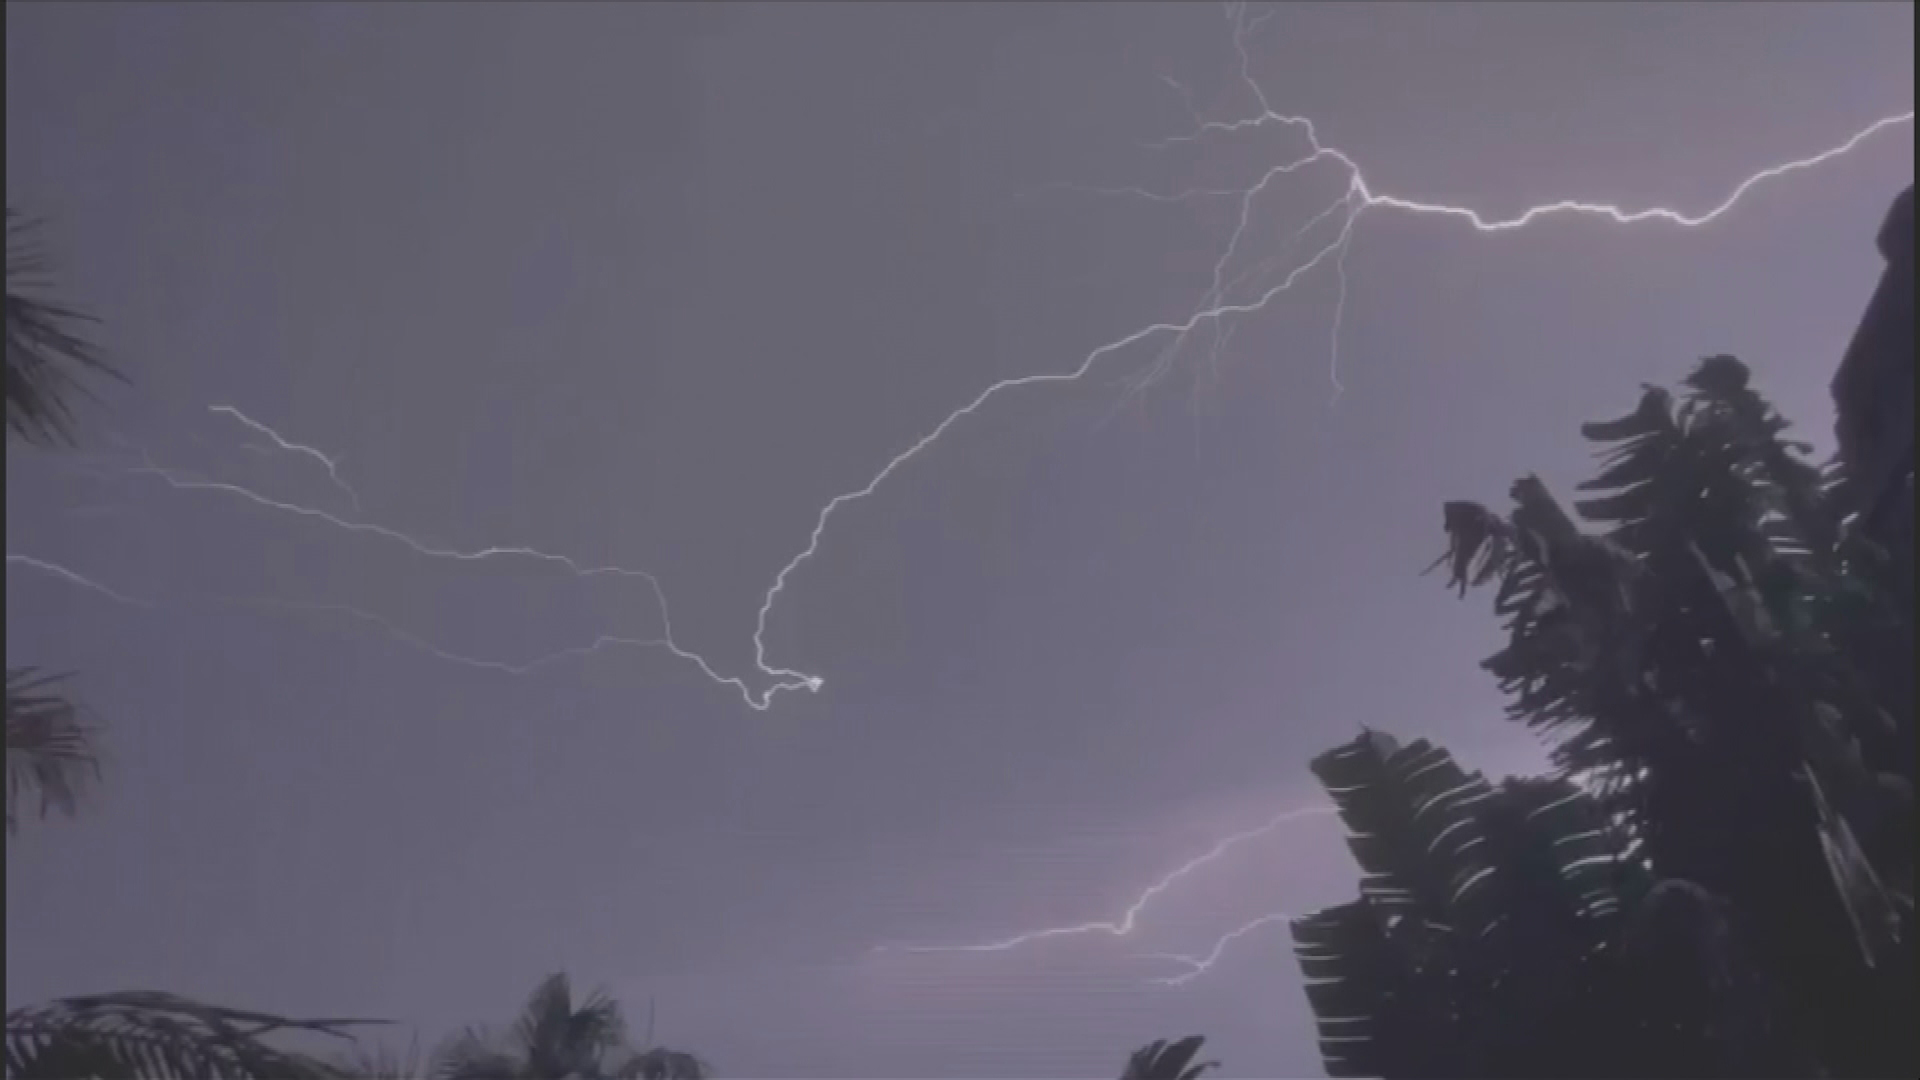 South-east Queensland has been battered by wild winds, lightning and golf-ball-sized hail, destroying a single mother's home in Brisbane's south.